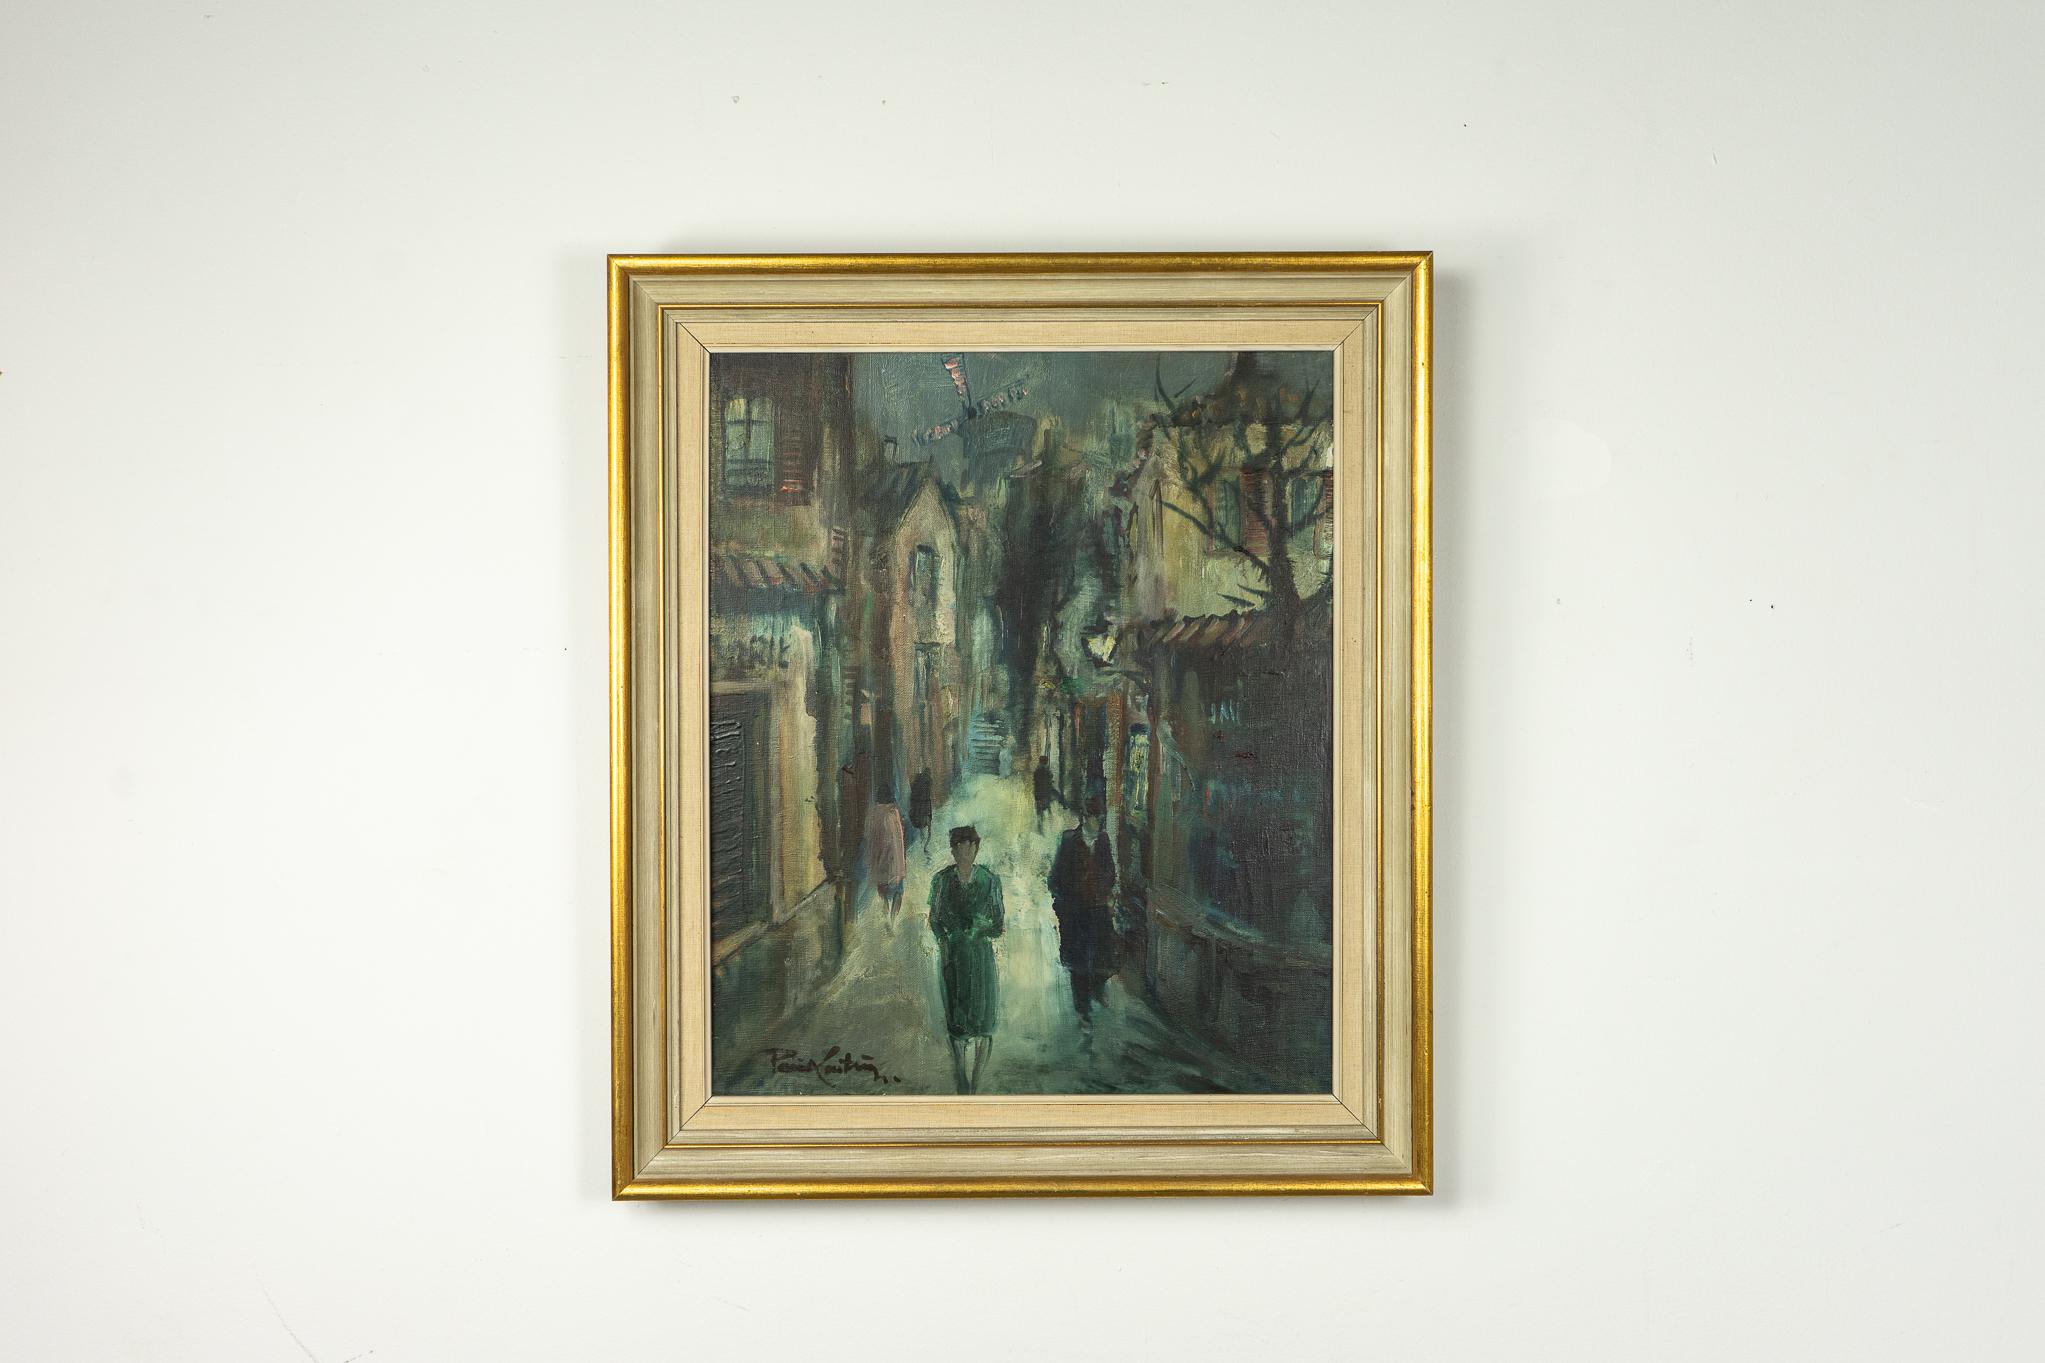 Oil painting with gilded gold frame by Poul Kastrup, circa 1950's. An urban scene with a central figure in the foreground of a moody, intriguing streetscape. Signed original, artist biography on back side.

Please inquire for international and